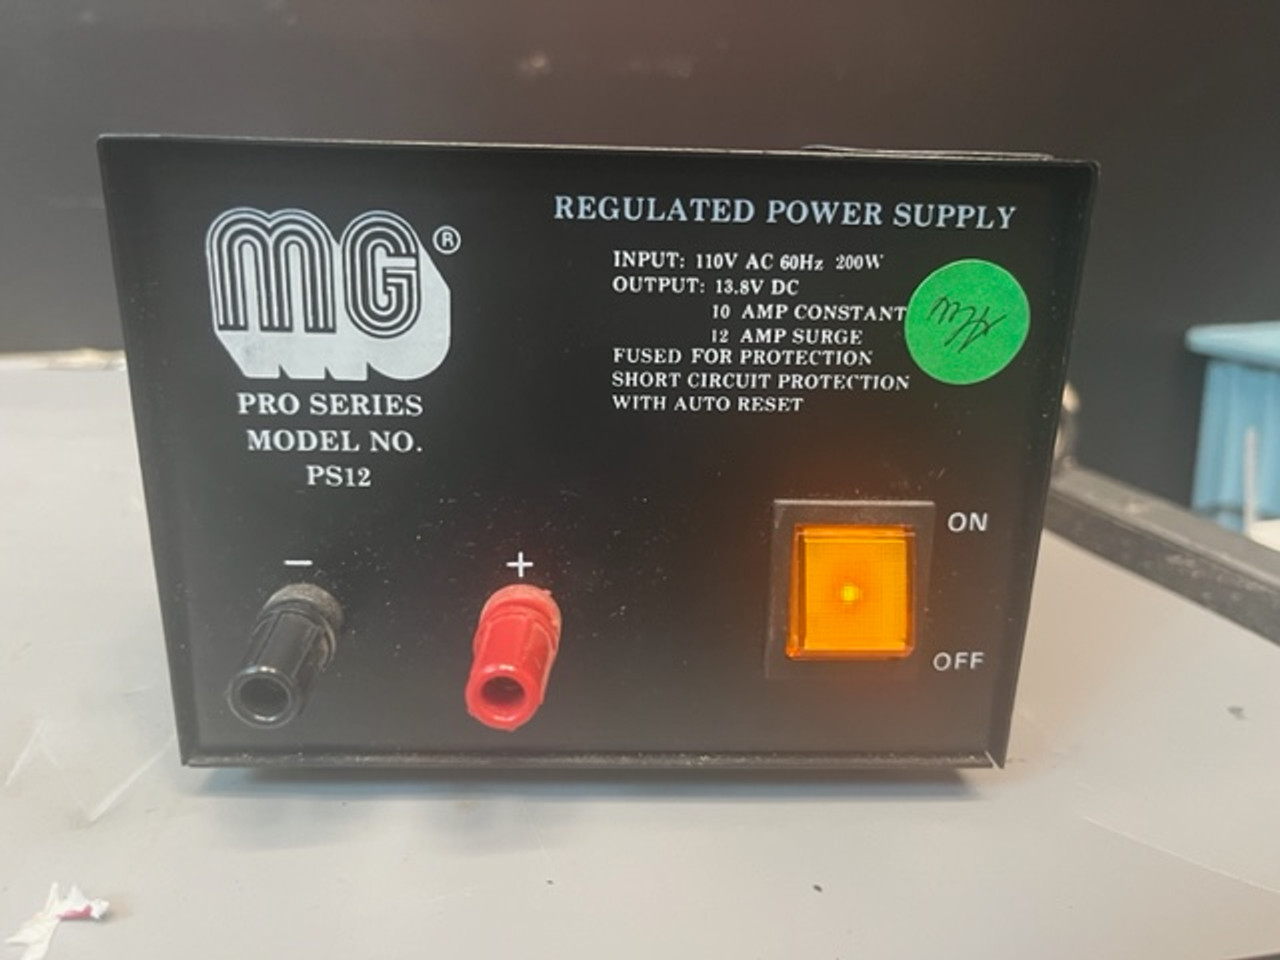 MG Pro Series Model PS12 Regulated Power Supply